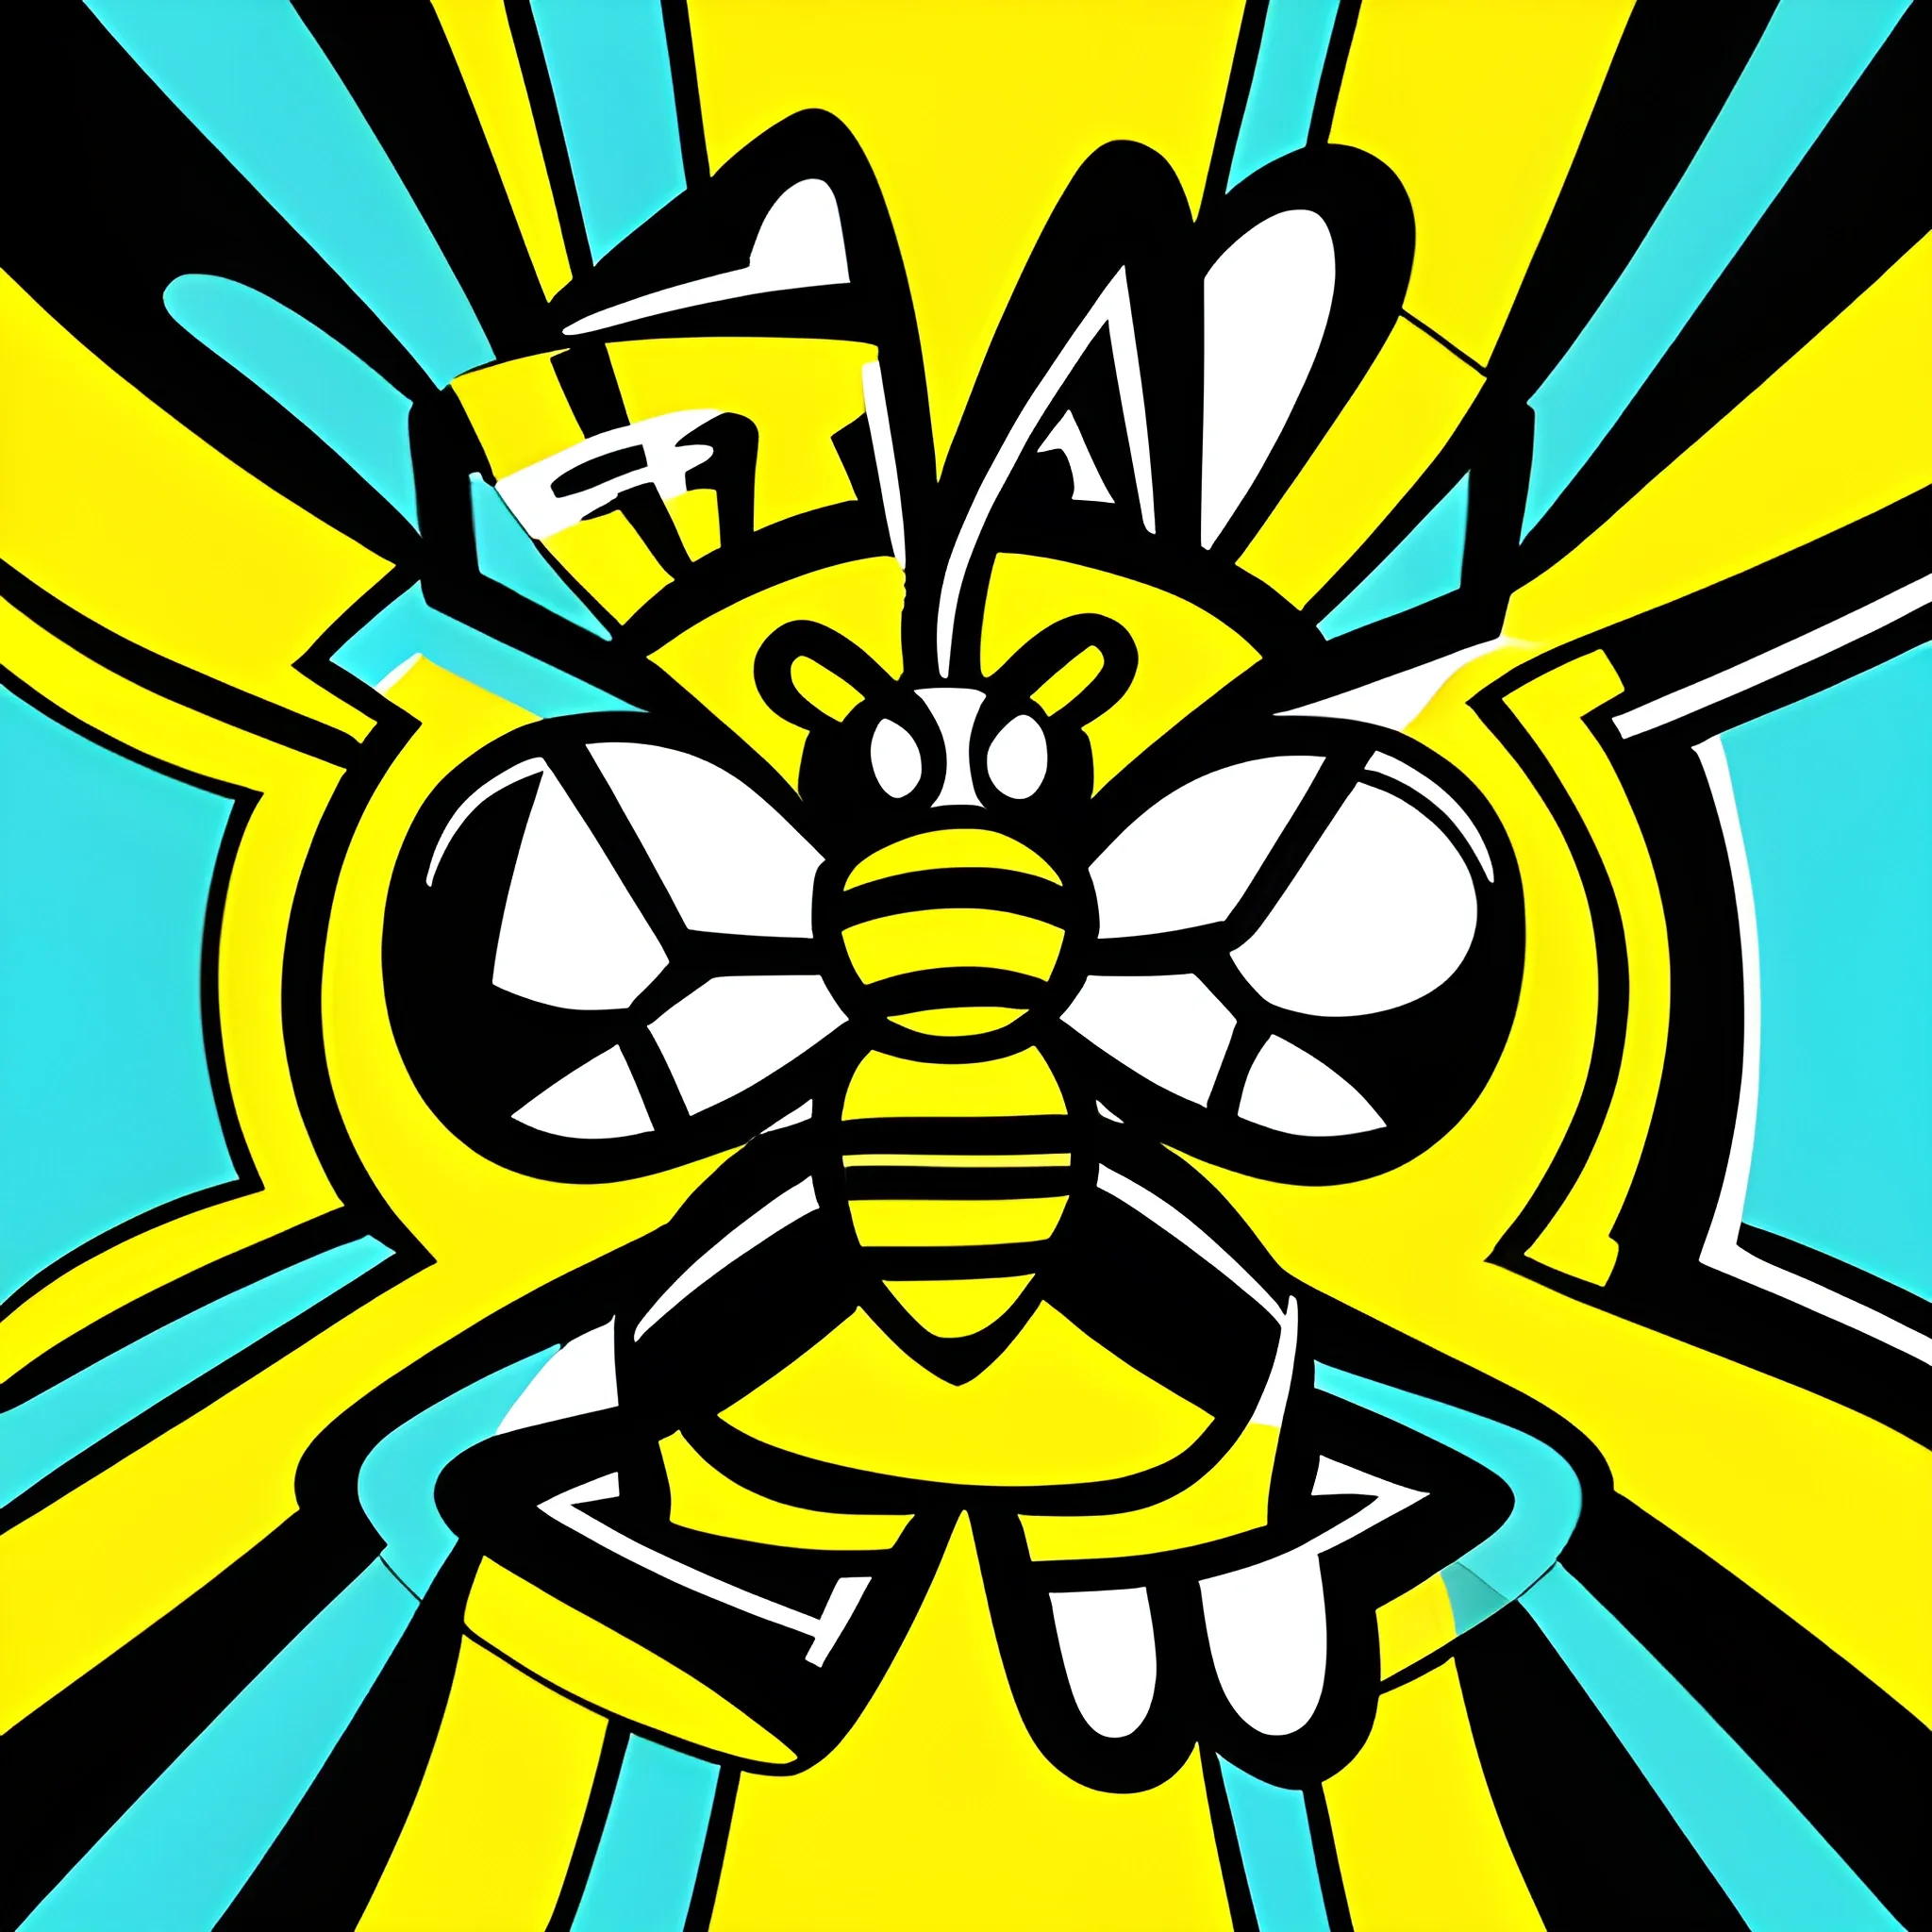 A stylized cartoon bee, made up of simple geometric shapes, with clean lines and bold colors, floating in mid-air amidst an abstract and surreal environment, filled with vivid hues and abstract patterns, evoking a sense of wonder and curiosity, resembling the art style of Keith Haring, with a vibrant and energetic atmosphere.